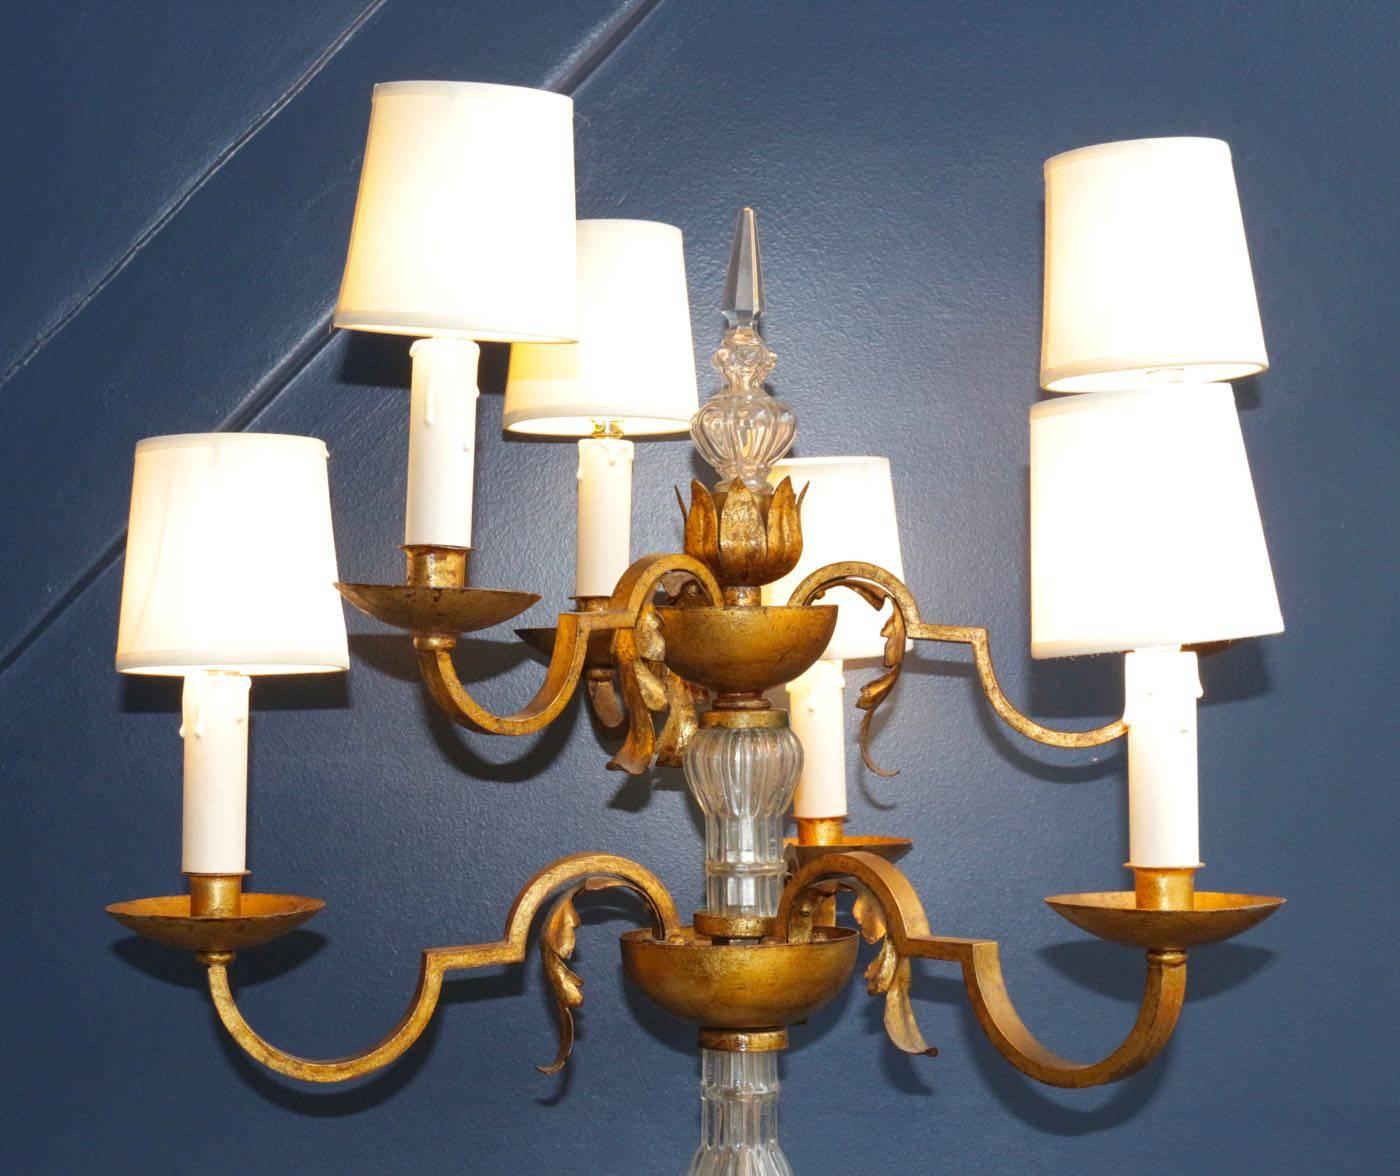 Rare Floor Lamp in the Style of Poillerat, France, 1940s For Sale 1